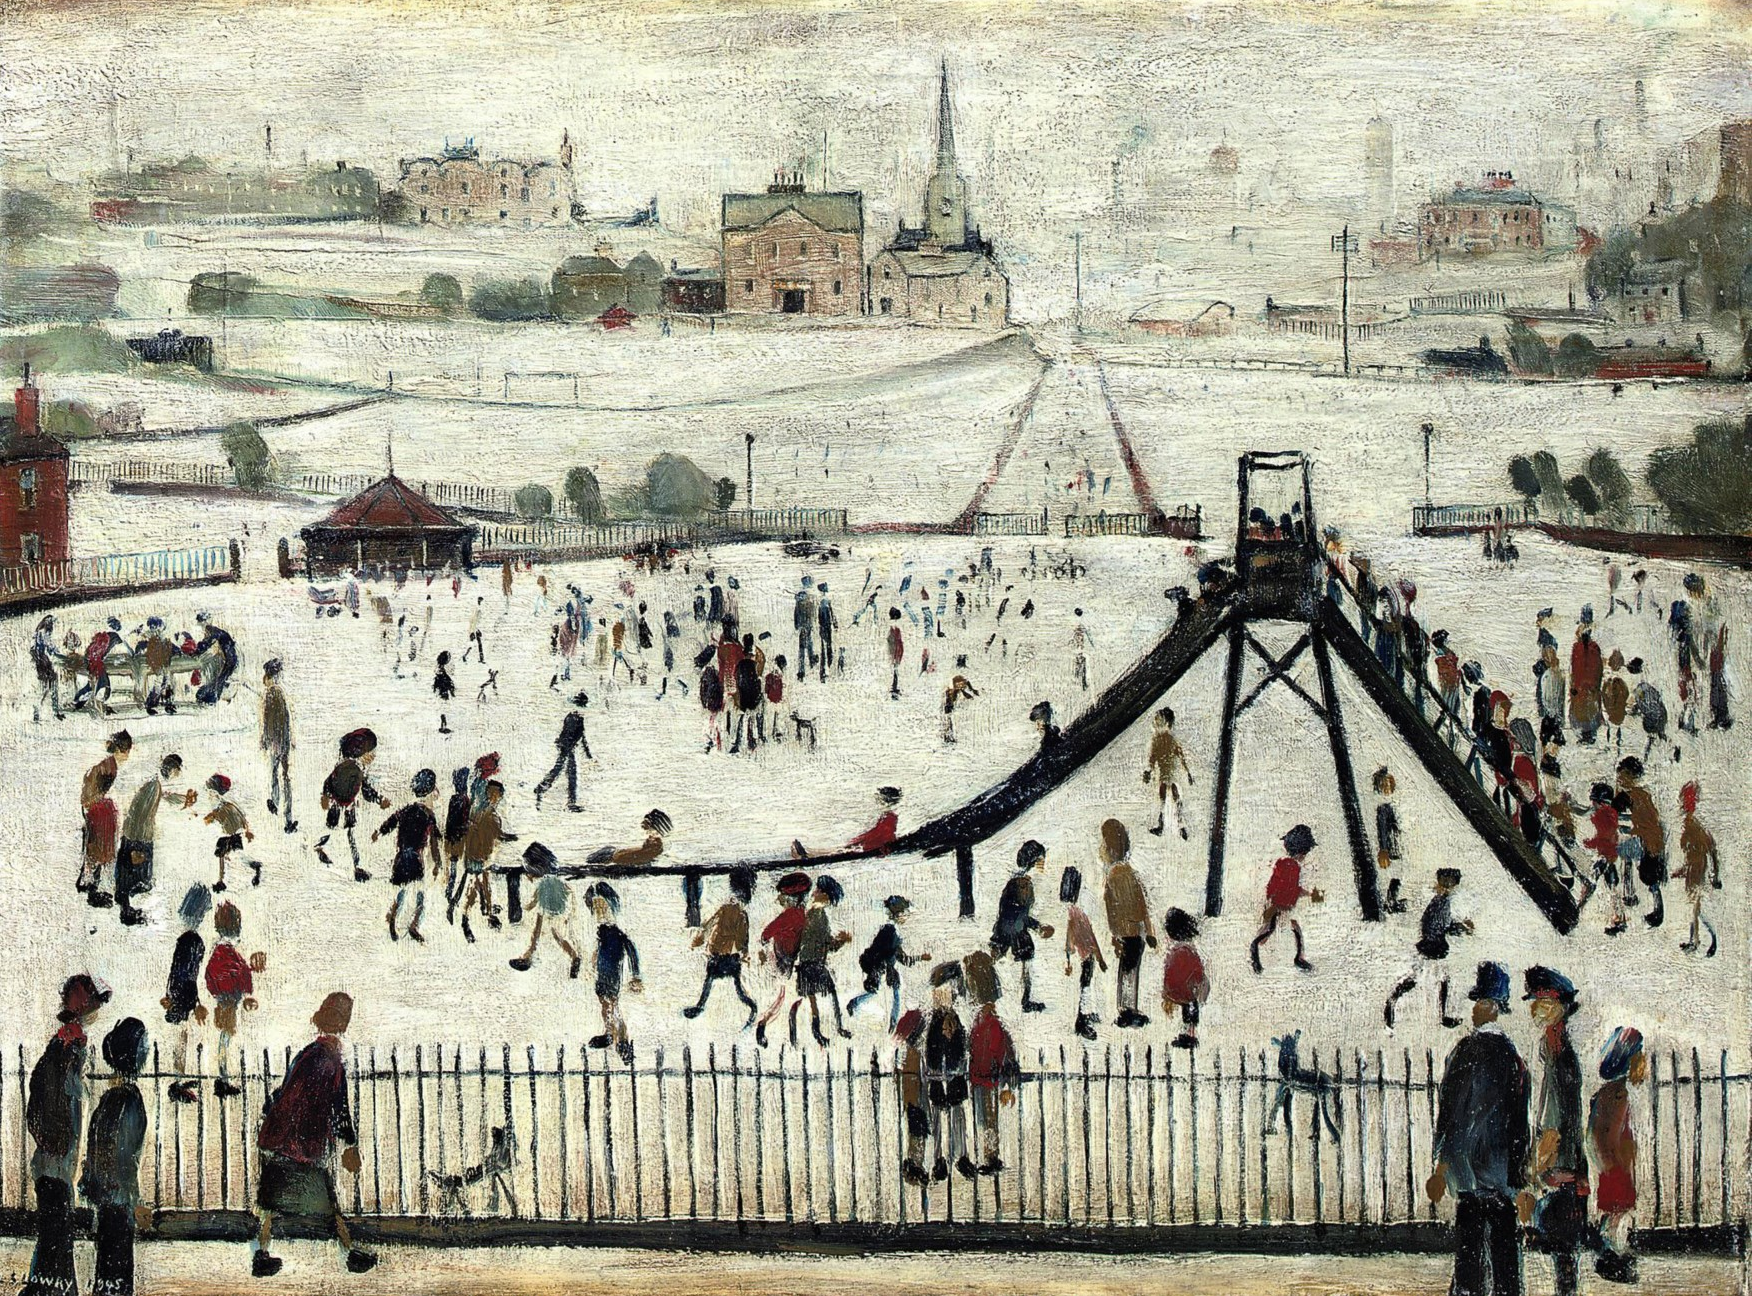 The Playground (1945) by Laurence Stephen Lowry (1887 - 1976), English artist.